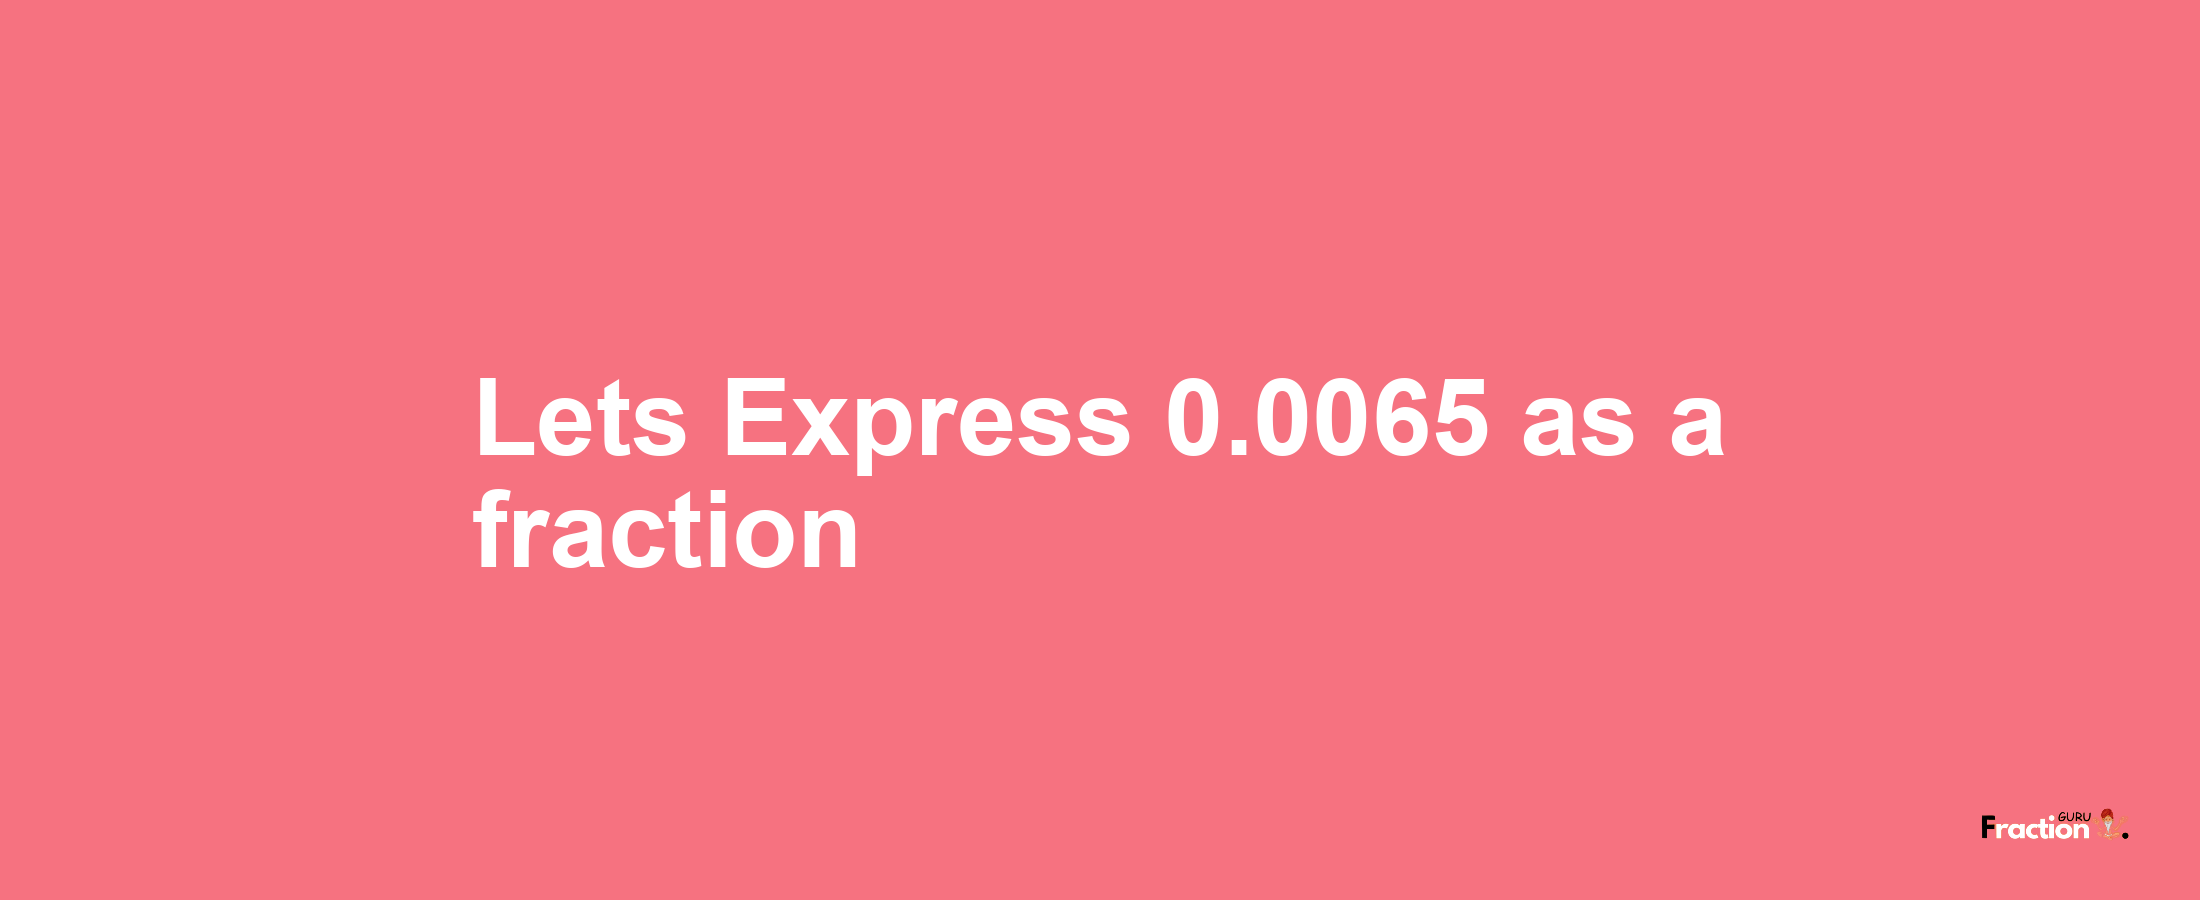 Lets Express 0.0065 as afraction